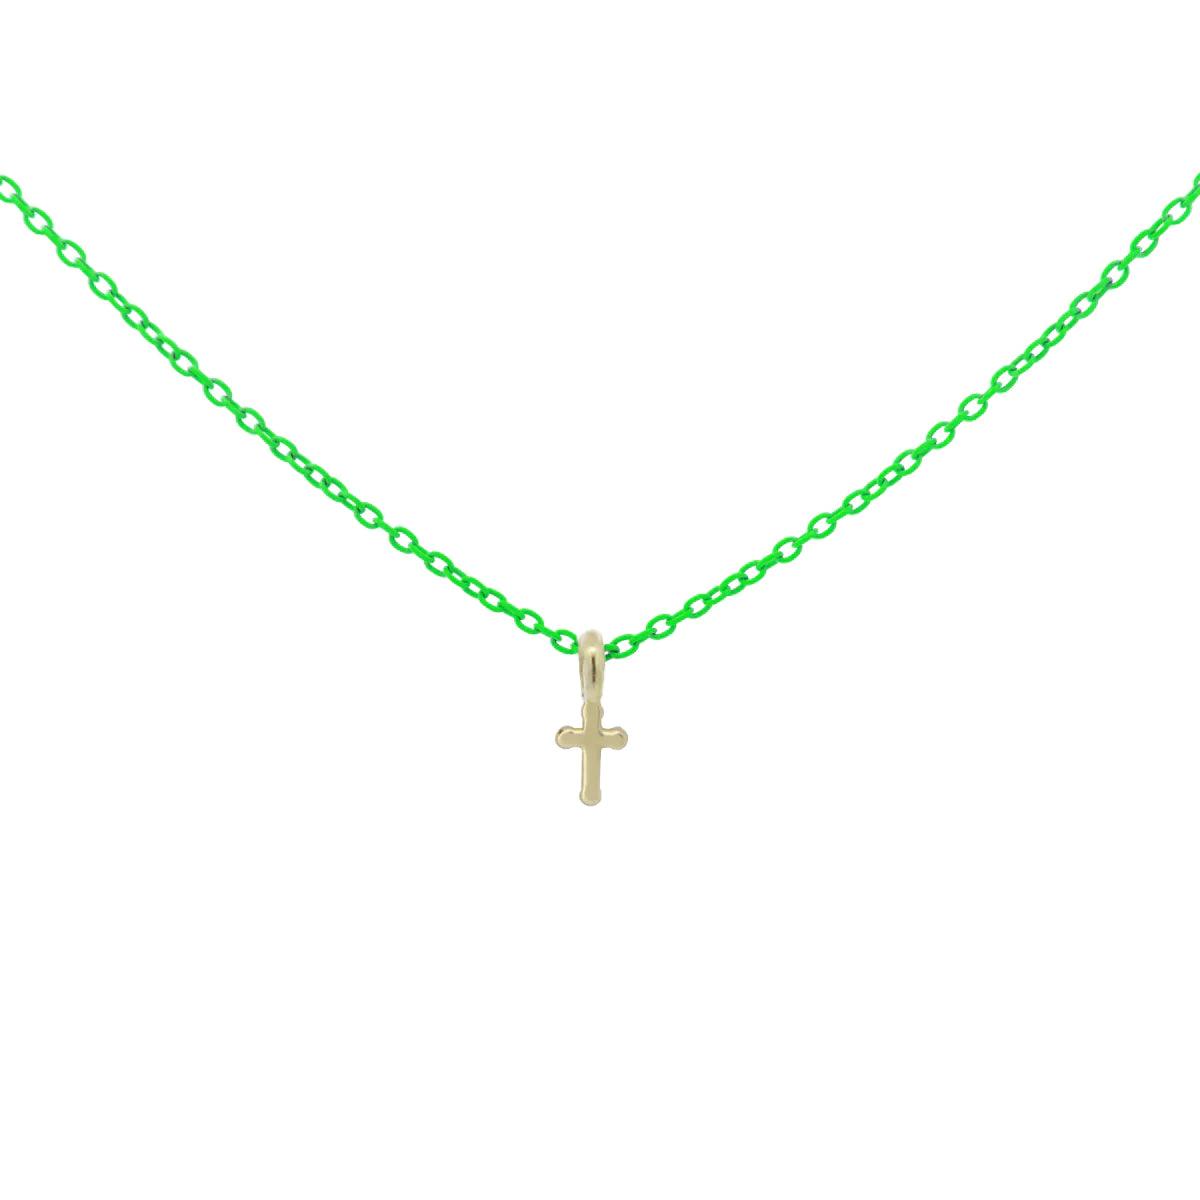 Choker with 18kt Gold Cross and Painted Chain - Moregola Fine Jewelry